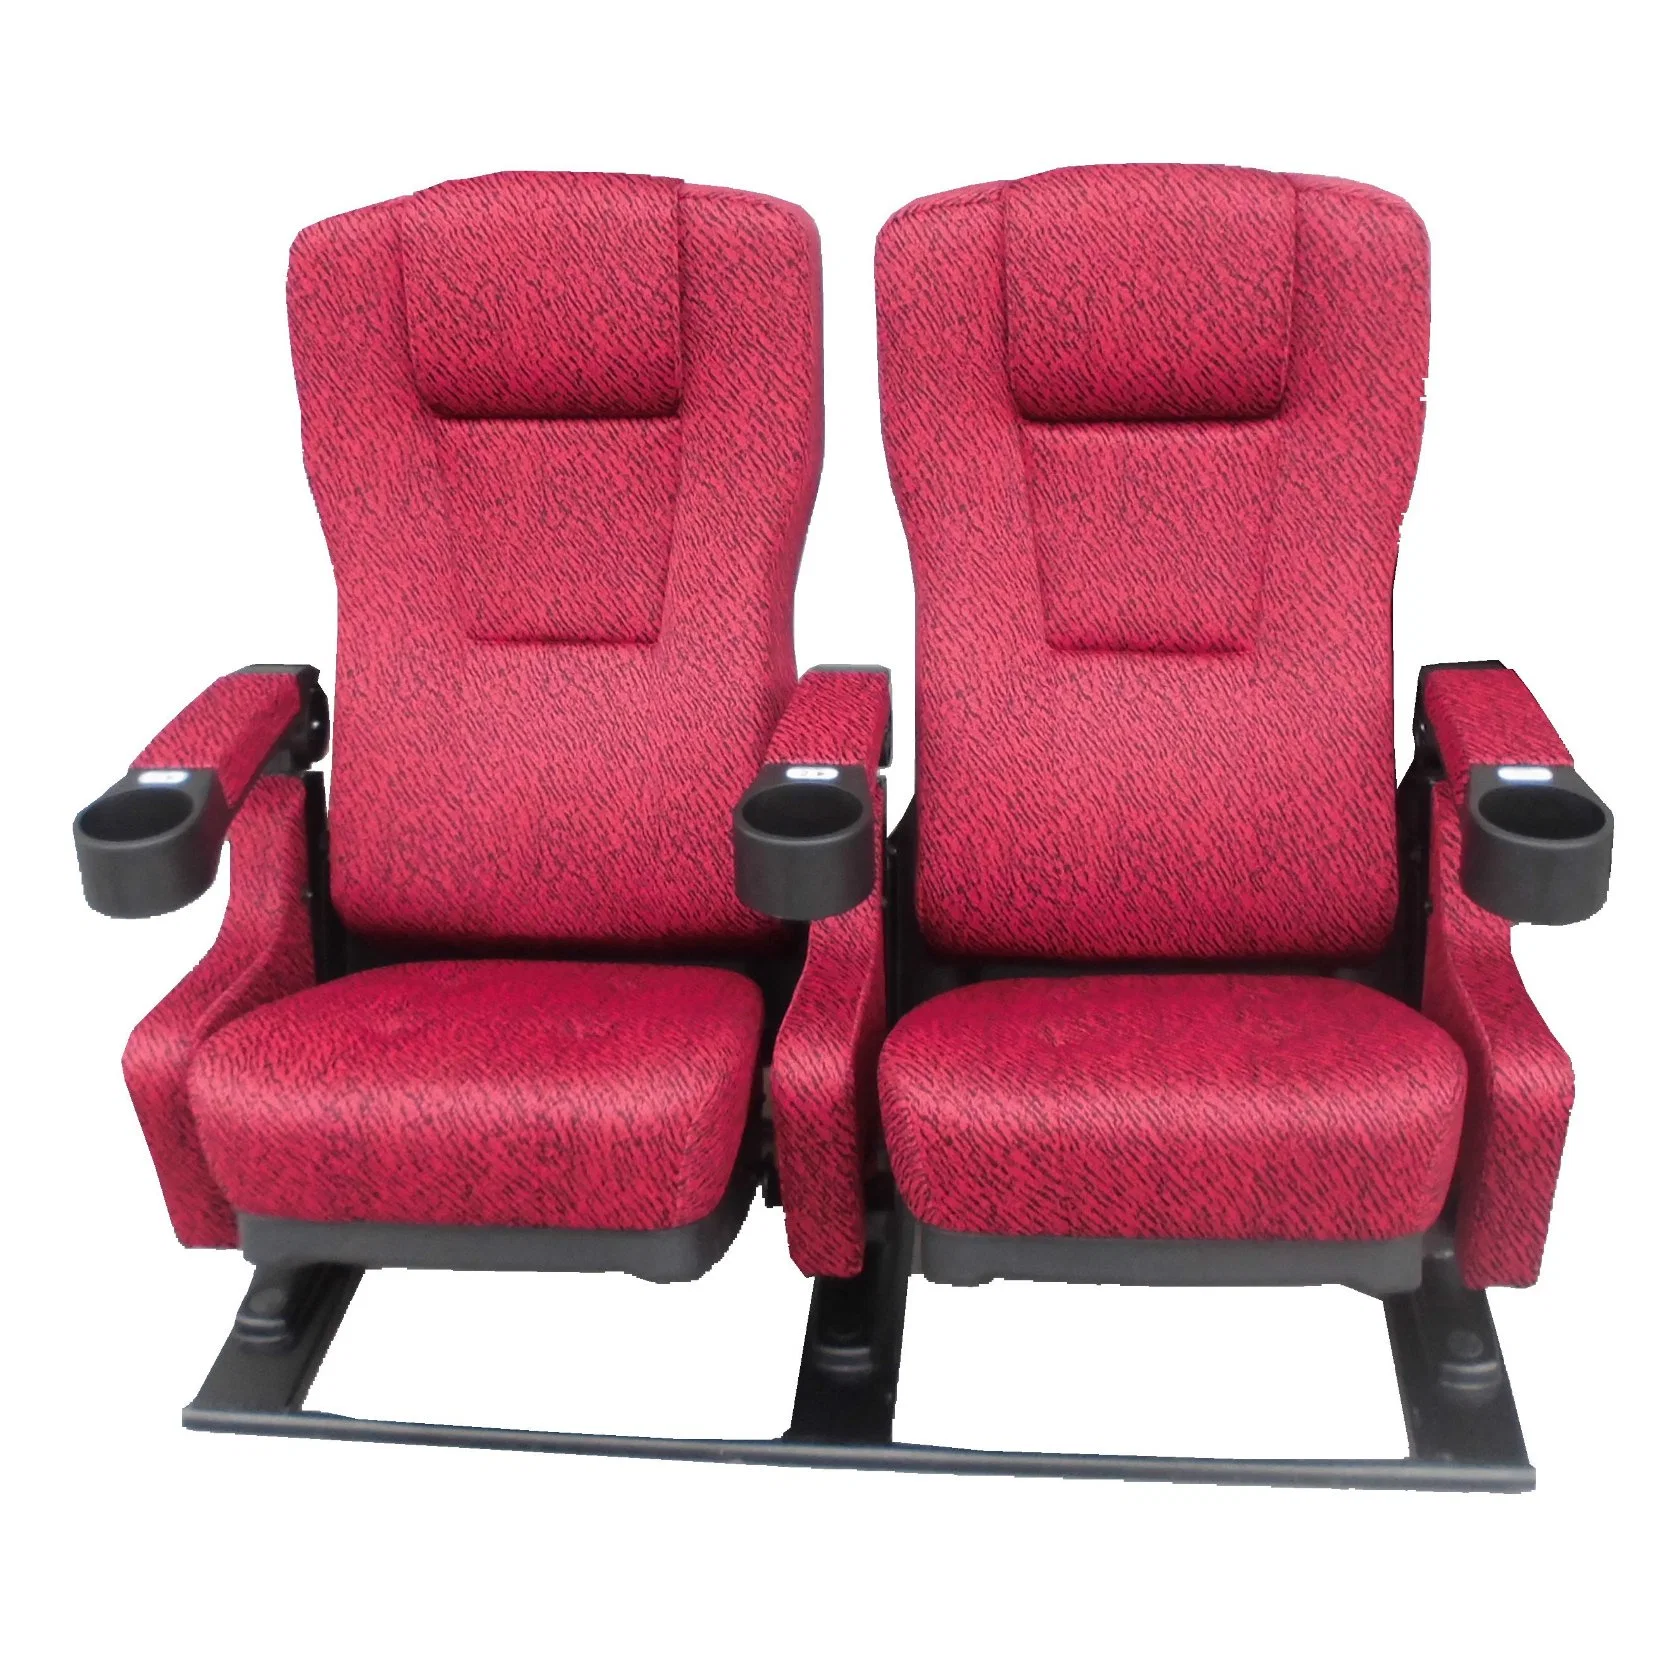 Cinema Chair Auditorium Seating Theater Seat (S21A)